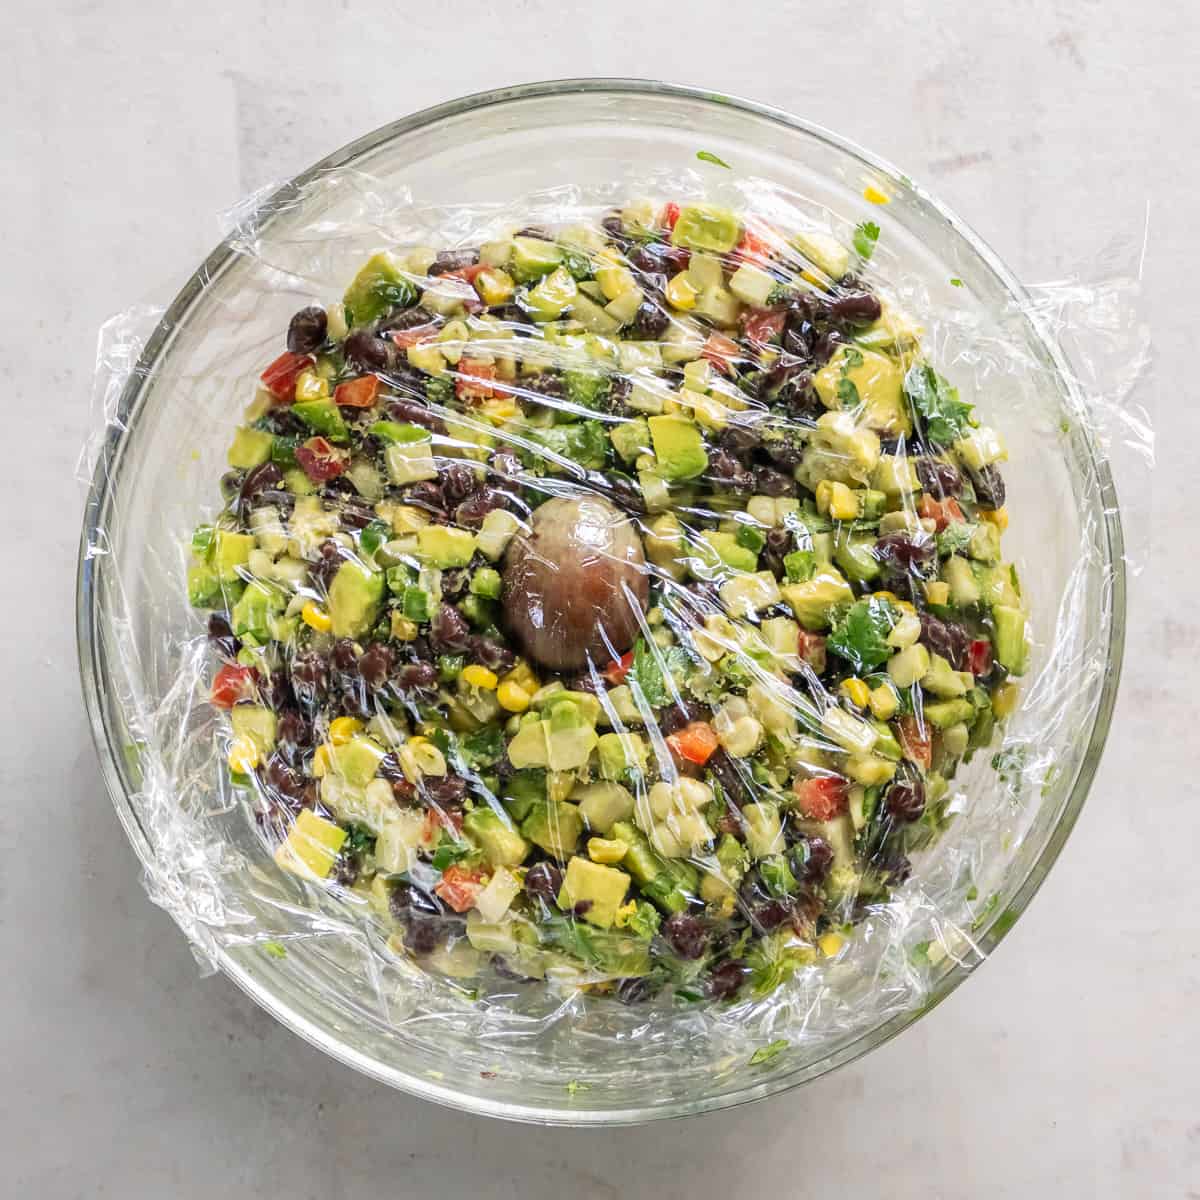 A bowl of guacamole with an avocado pit pressed into it and covered tightly with plastic wrap.